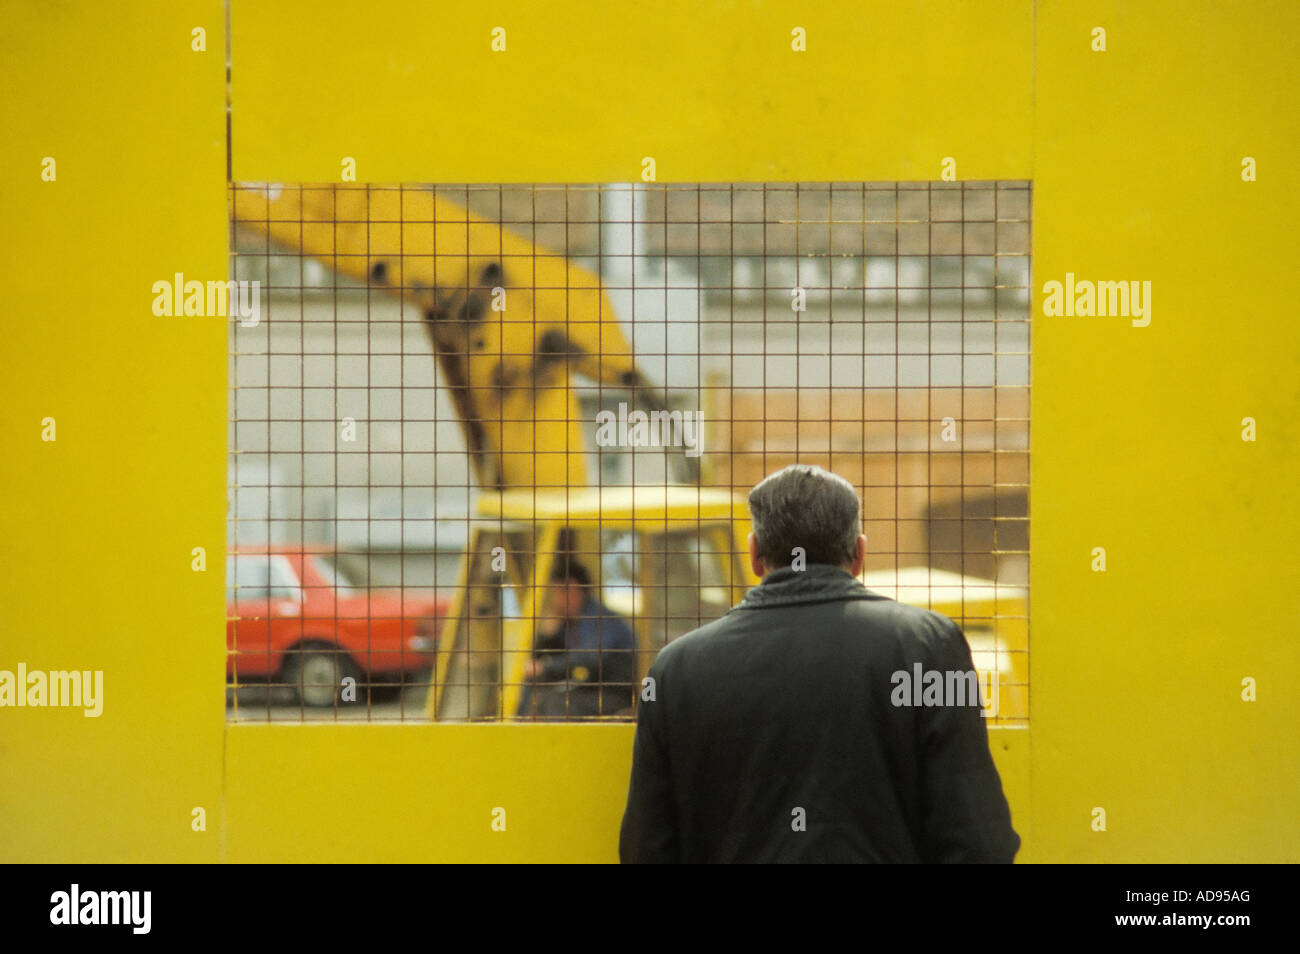 Old man watches building construction work through barrier Stock Photo